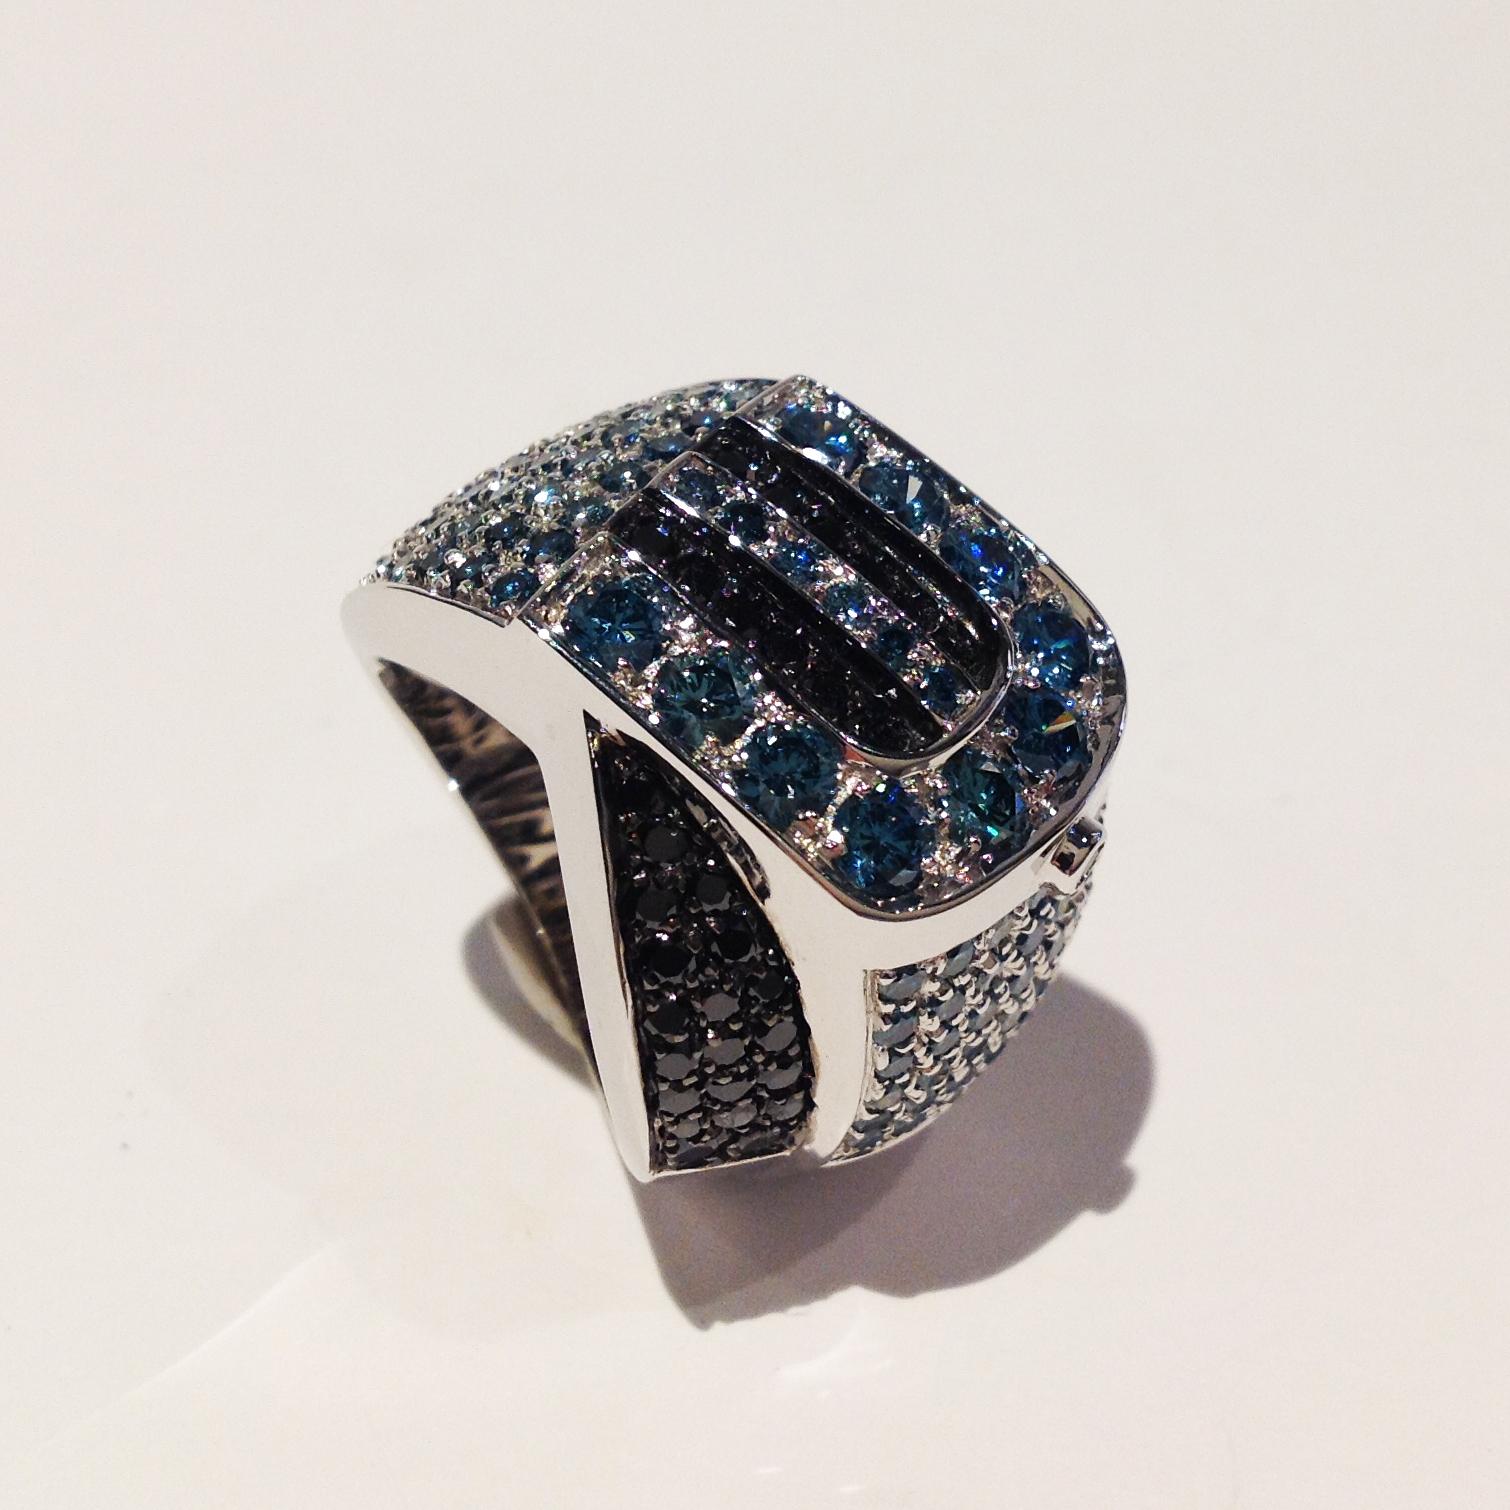 Ring in 18kt white gold which sets Sky Diamonds for 3,10cts, Black Diamonds for 1,16cts.

Unique piece, designed and handcrafted in Italy, by visionary goldsmith Paolo Piovan. 

Paolo Piovan Jewels, creations of the purest expression of Italian